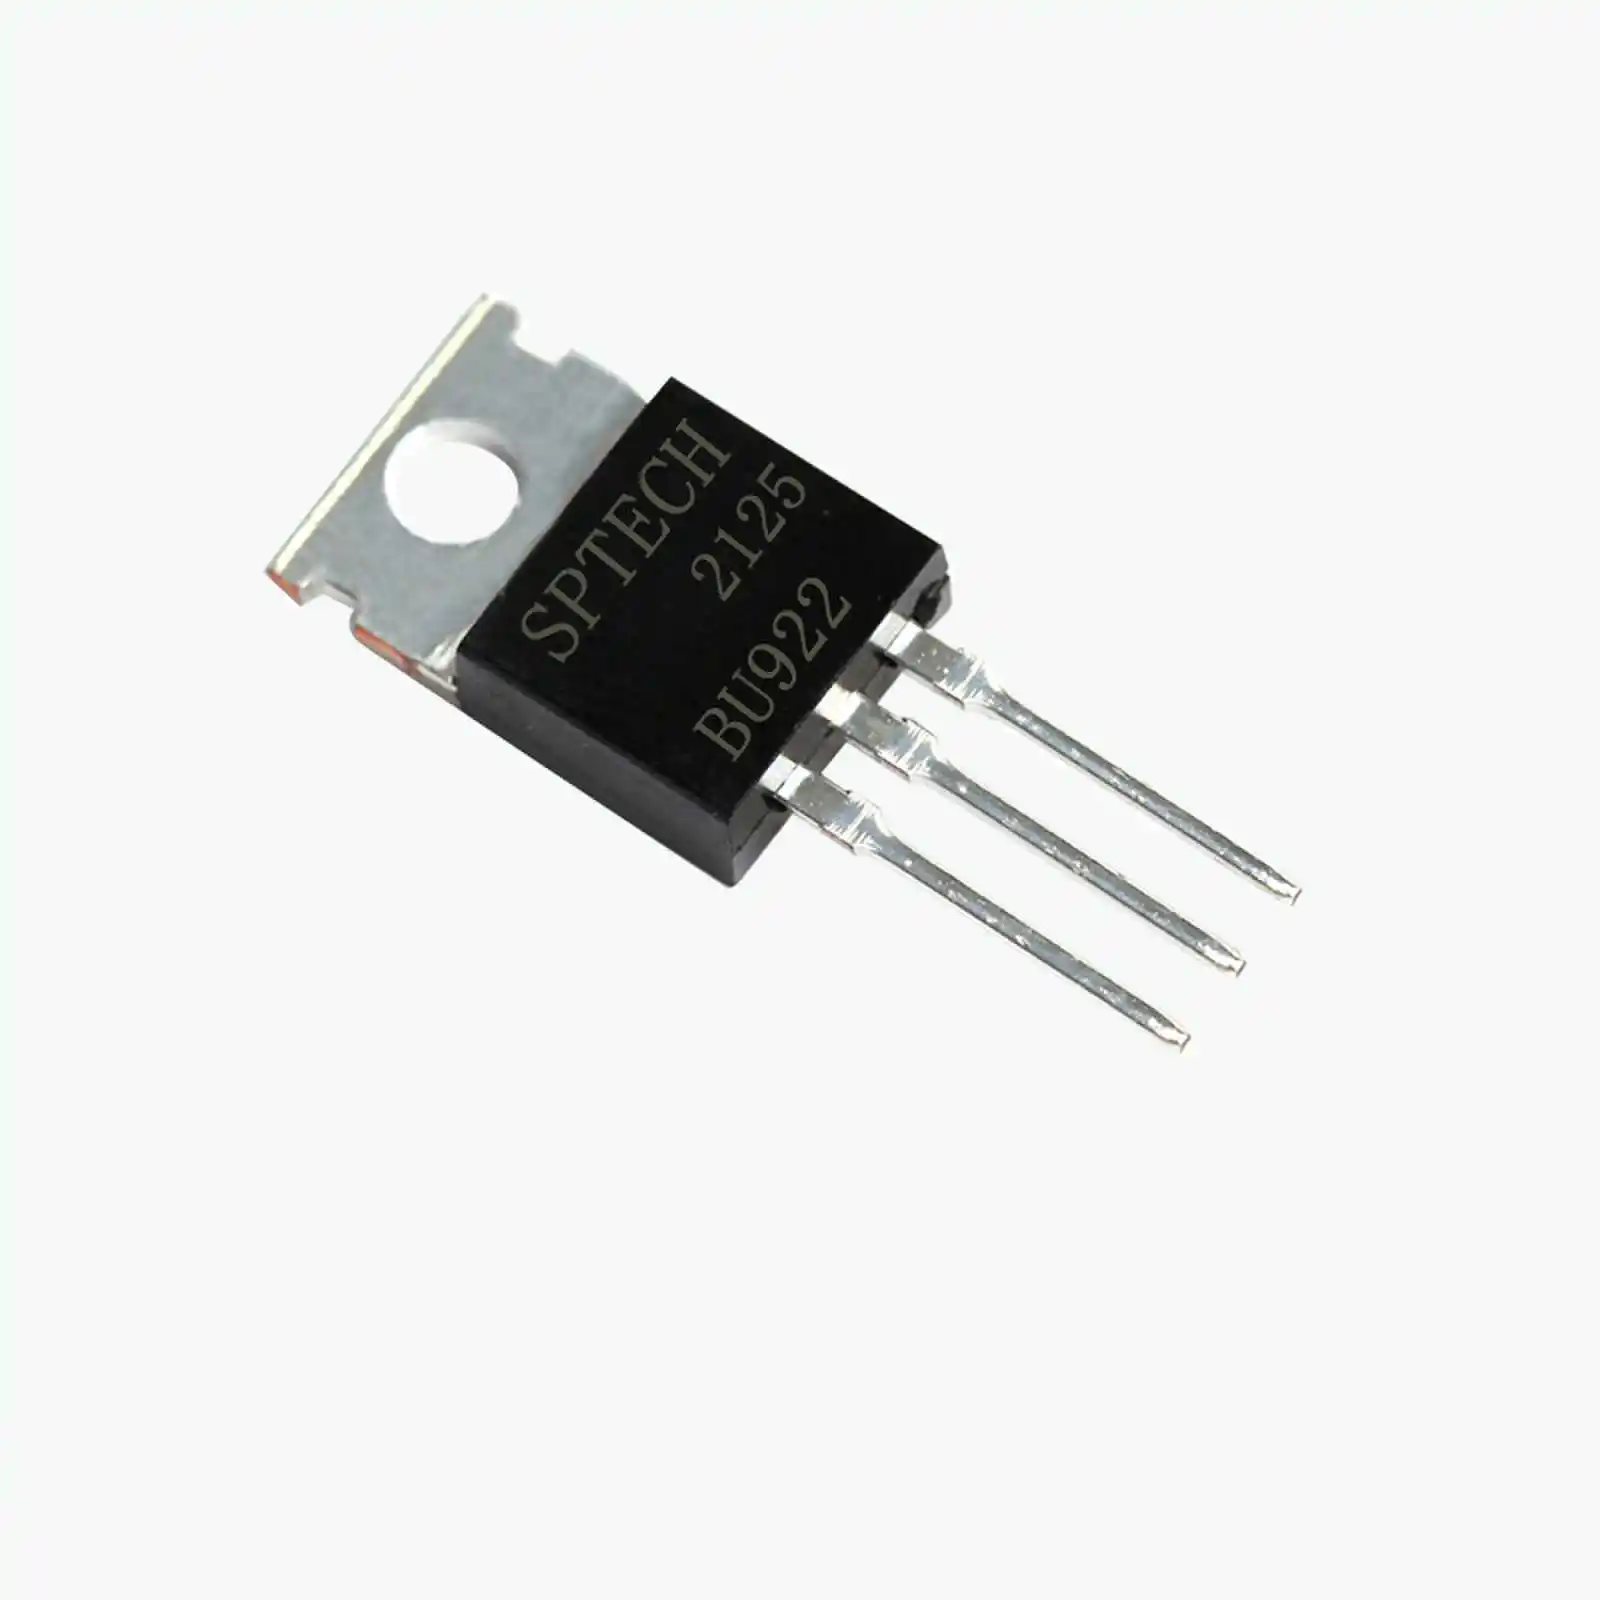 Bu922 sptech special transistor for automobile igniter bu922 TO-3 gold sealed high power transistor 105W Silicon NPN